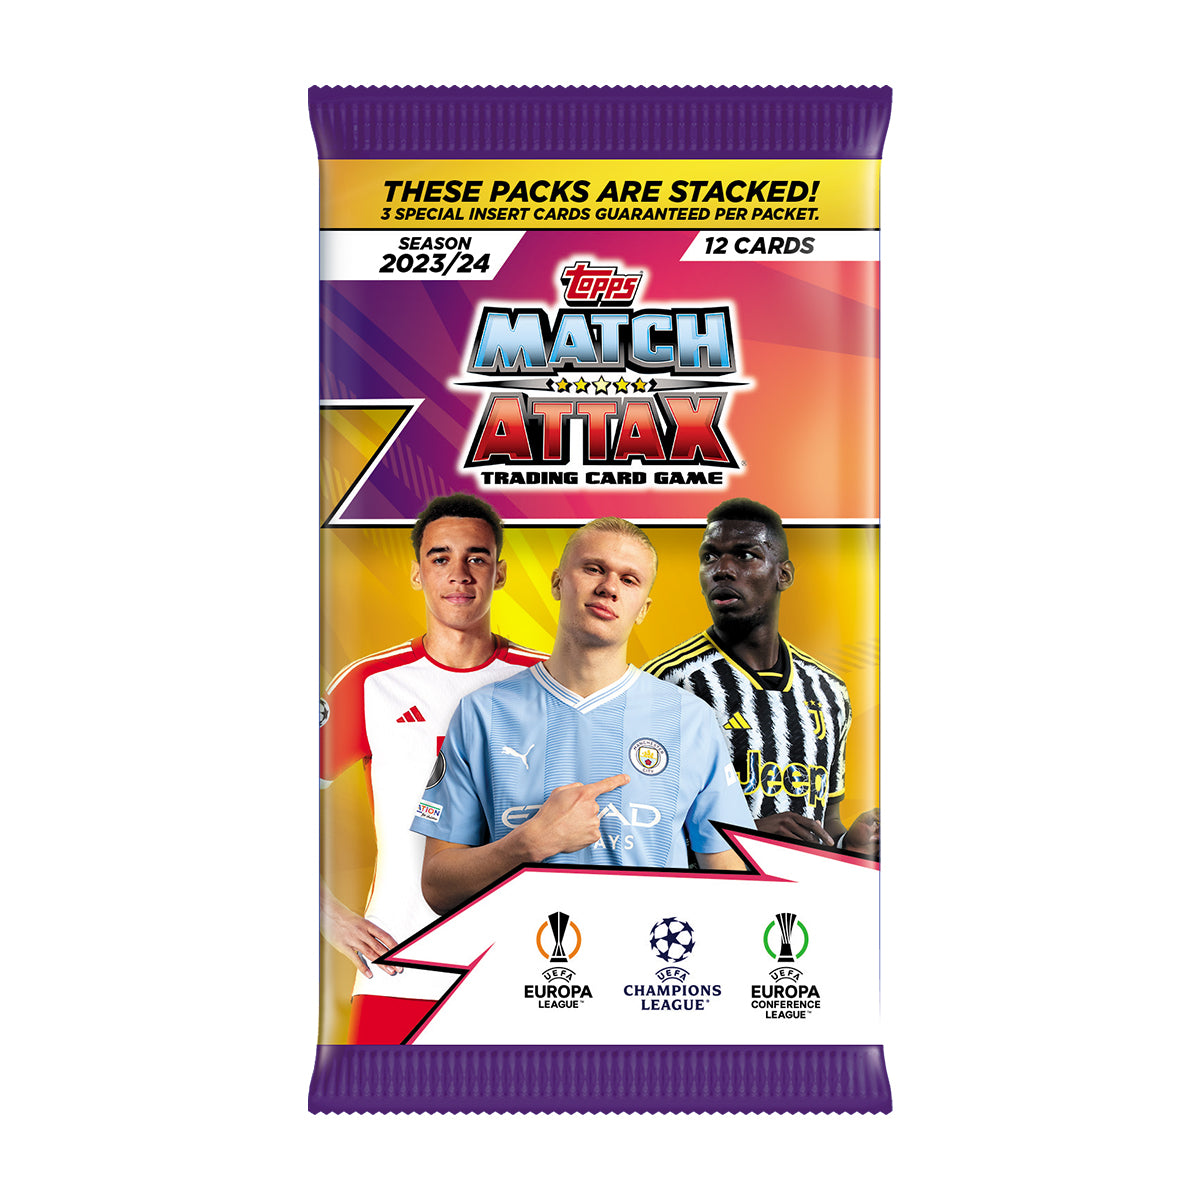 2023-24 TOPPS MATCH ATTAX UEFA CHAMPIONS LEAGUE CARDS - BUNDLE #1 (BOX & STARTER PACK) (ALBUM, 324 CARDS + 3 LE)